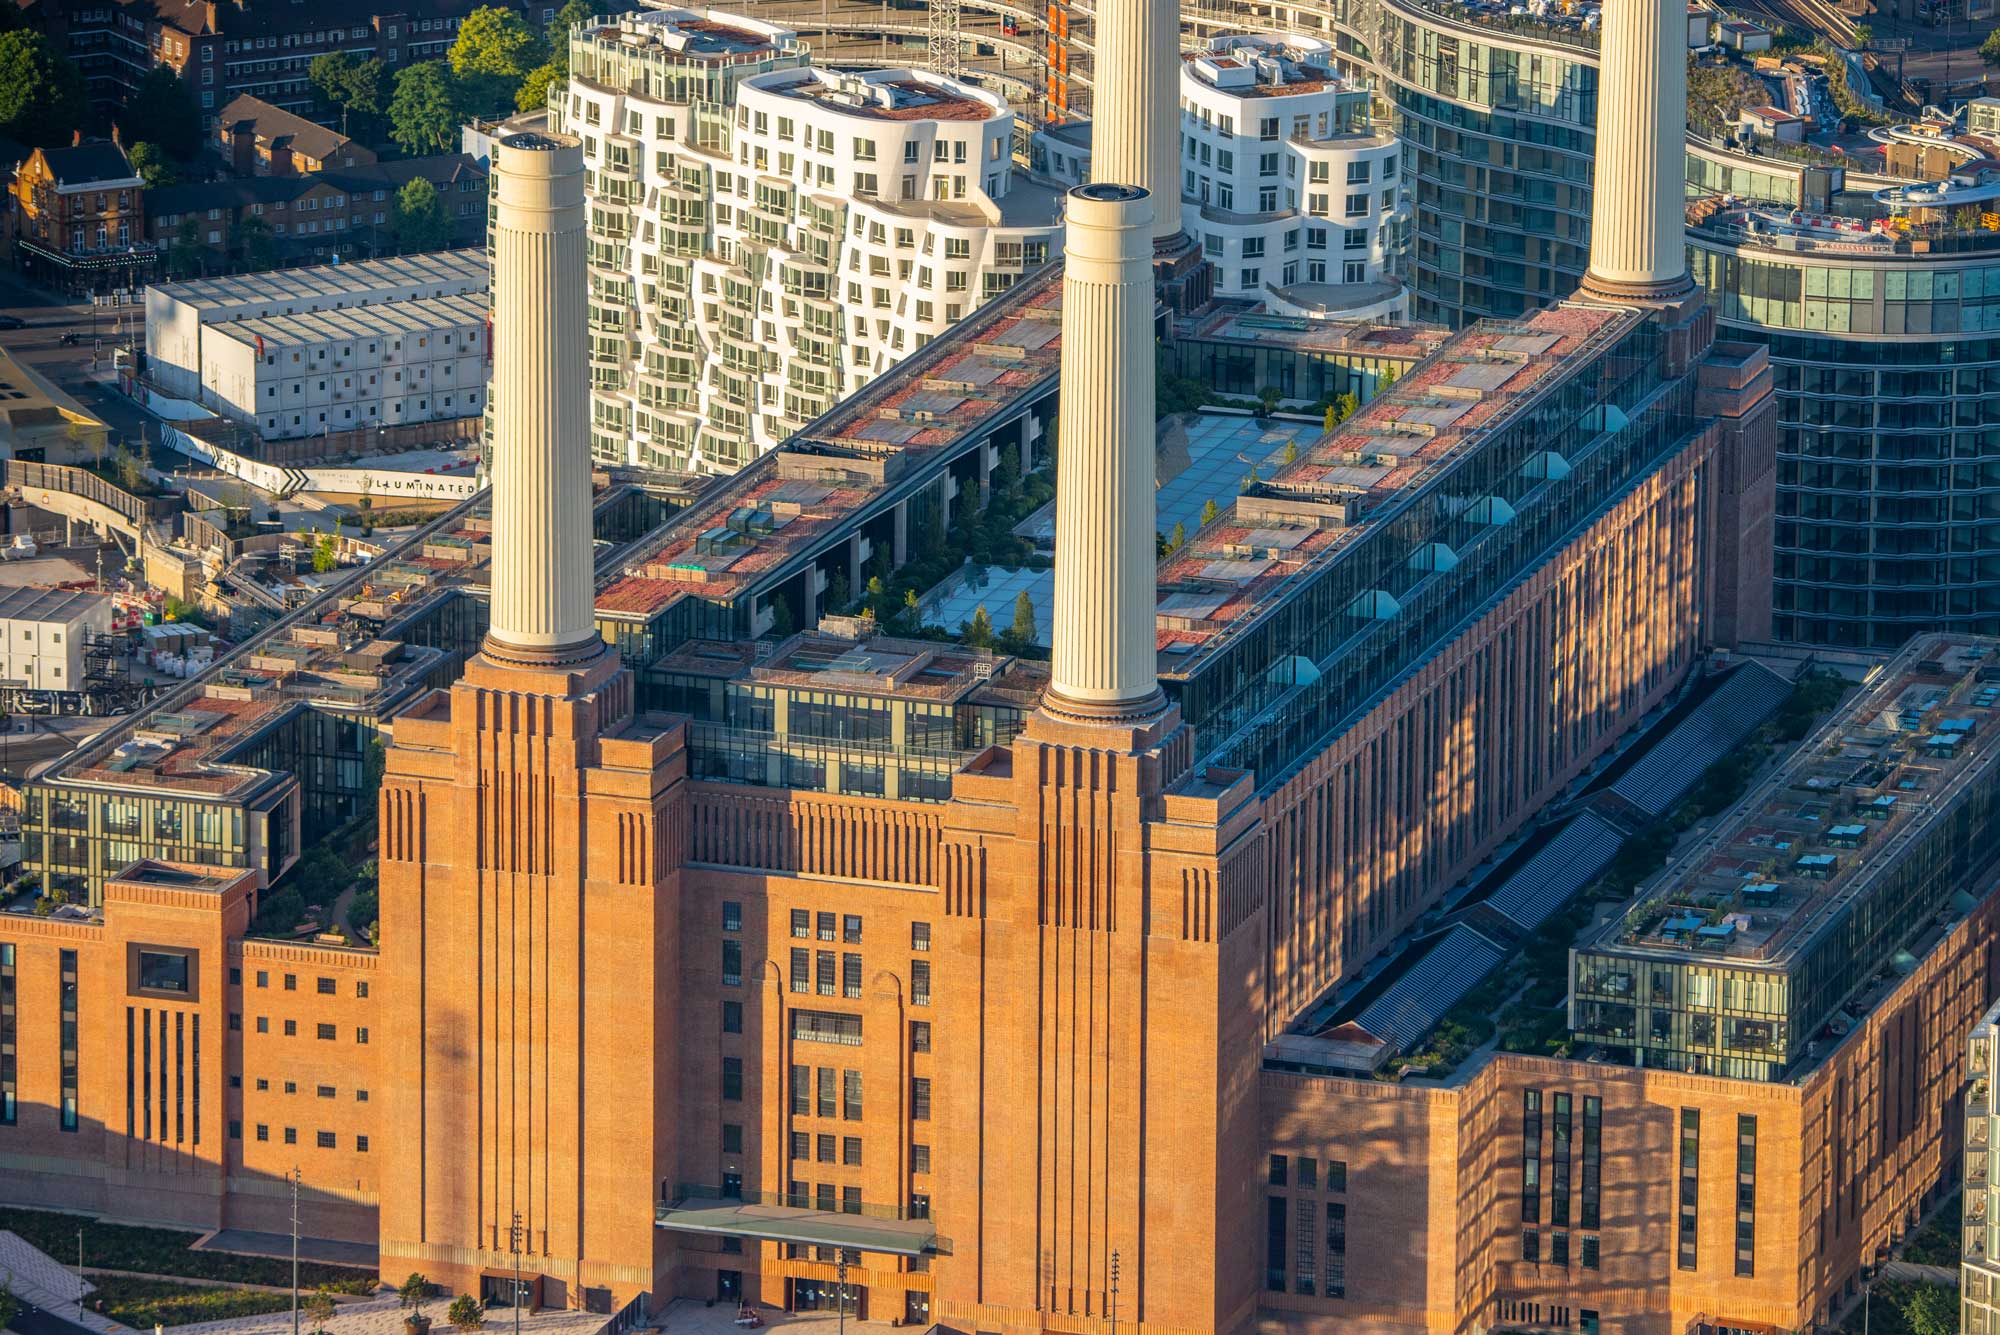 Battersea Power Station OAG Architectural Glass Roofs